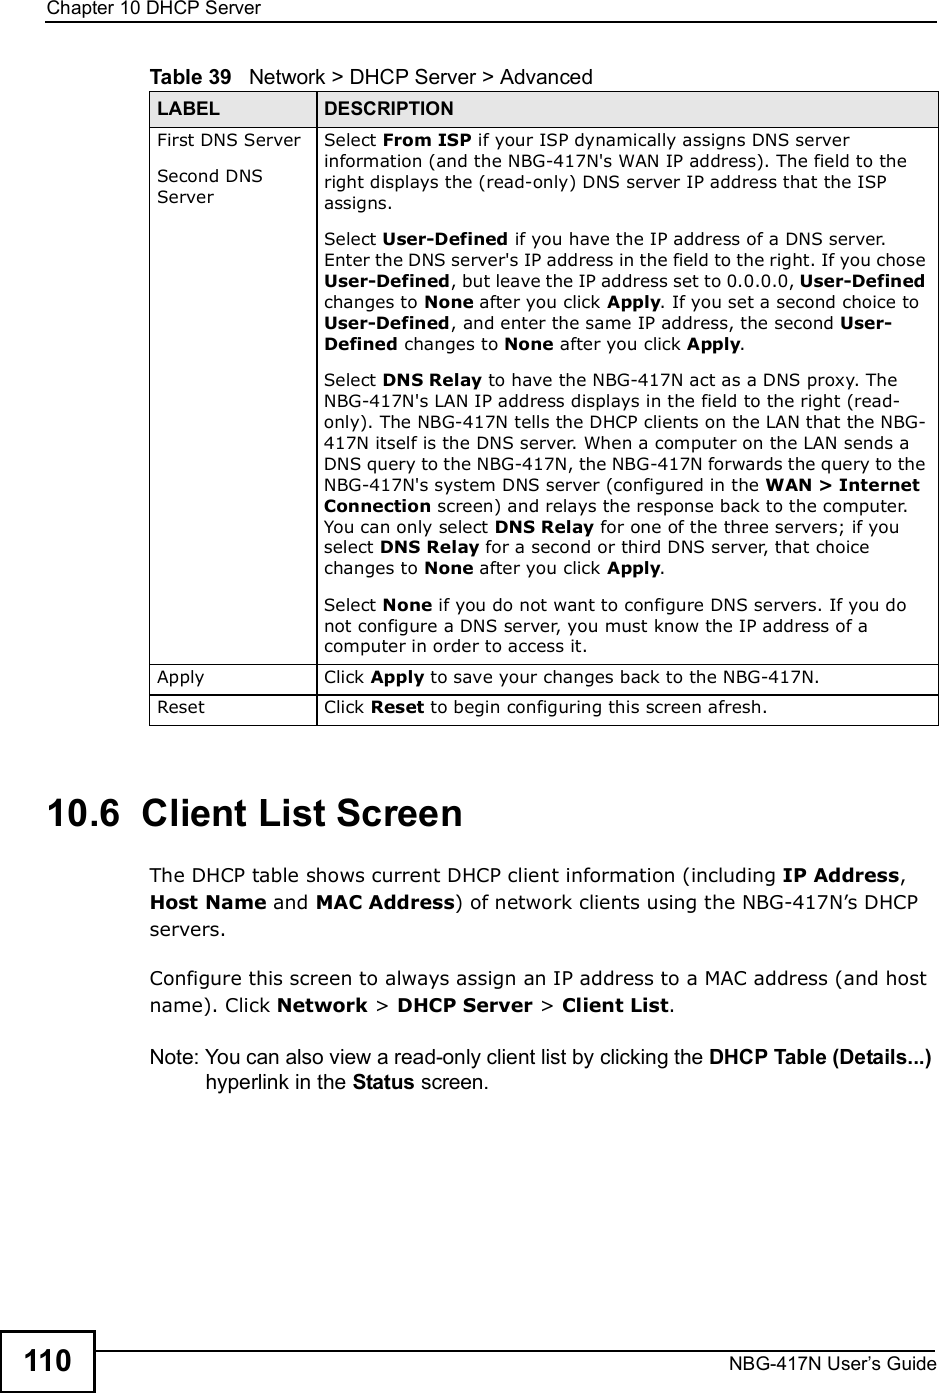 Chapter 10DHCP ServerNBG-417N User s Guide11010.6  Client List ScreenThe DHCP table shows current DHCP client information (including IP Address, Host Name and MAC Address) of network clients using the NBG-417N!s DHCP servers.Configure this screen to always assign an IP address to a MAC address (and host name). Click Network &gt; DHCP Server &gt; Client List. Note: You can also view a read-only client list by clicking the DHCP Table (Details...) hyperlink in the Status screen. First DNS ServerSecond DNS Server Select From ISP if your ISP dynamically assigns DNS server information (and the NBG-417N&apos;s WAN IP address). The field to the right displays the (read-only) DNS server IP address that the ISP assigns. Select User-Defined if you have the IP address of a DNS server. Enter the DNS server&apos;s IP address in the field to the right. If you chose User-Defined, but leave the IP address set to 0.0.0.0, User-Defined changes to None after you click Apply. If you set a second choice to User-Defined, and enter the same IP address, the second User-Defined changes to None after you click Apply. Select DNS Relay to have the NBG-417N act as a DNS proxy. The NBG-417N&apos;s LAN IP address displays in the field to the right (read-only). The NBG-417N tells the DHCP clients on the LAN that the NBG-417N itself is the DNS server. When a computer on the LAN sends a DNS query to the NBG-417N, the NBG-417N forwards the query to the NBG-417N&apos;s system DNS server (configured in the WAN &gt; Internet Connection screen) and relays the response back to the computer. You can only select DNS Relay for one of the three servers; if you select DNS Relay for a second or third DNS server, that choice changes to None after you click Apply. Select None if you do not want to configure DNS servers. If you do not configure a DNS server, you must know the IP address of a computer in order to access it.Apply Click Apply to save your changes back to the NBG-417N.Reset Click Reset to begin configuring this screen afresh.Table 39   Network &gt; DHCP Server &gt; AdvancedLABEL DESCRIPTION